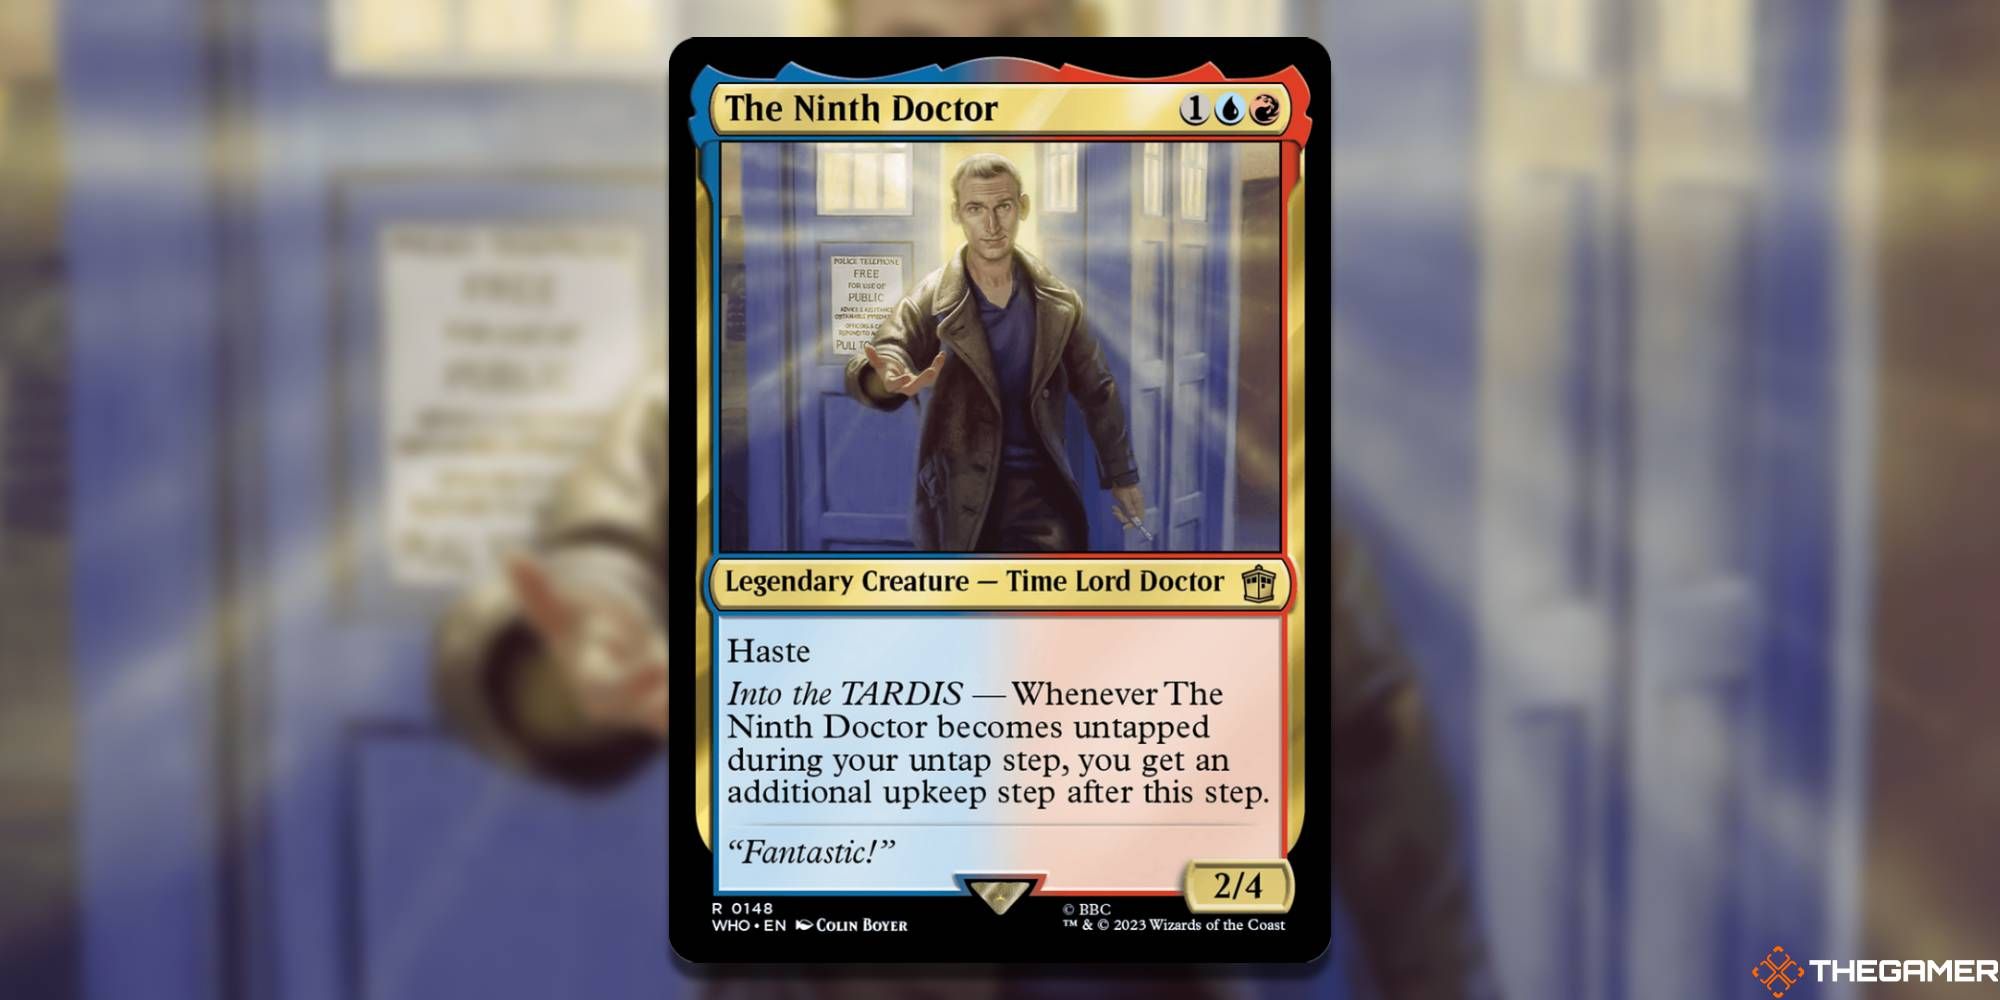 The Ninth Doctor by Colin Boyer